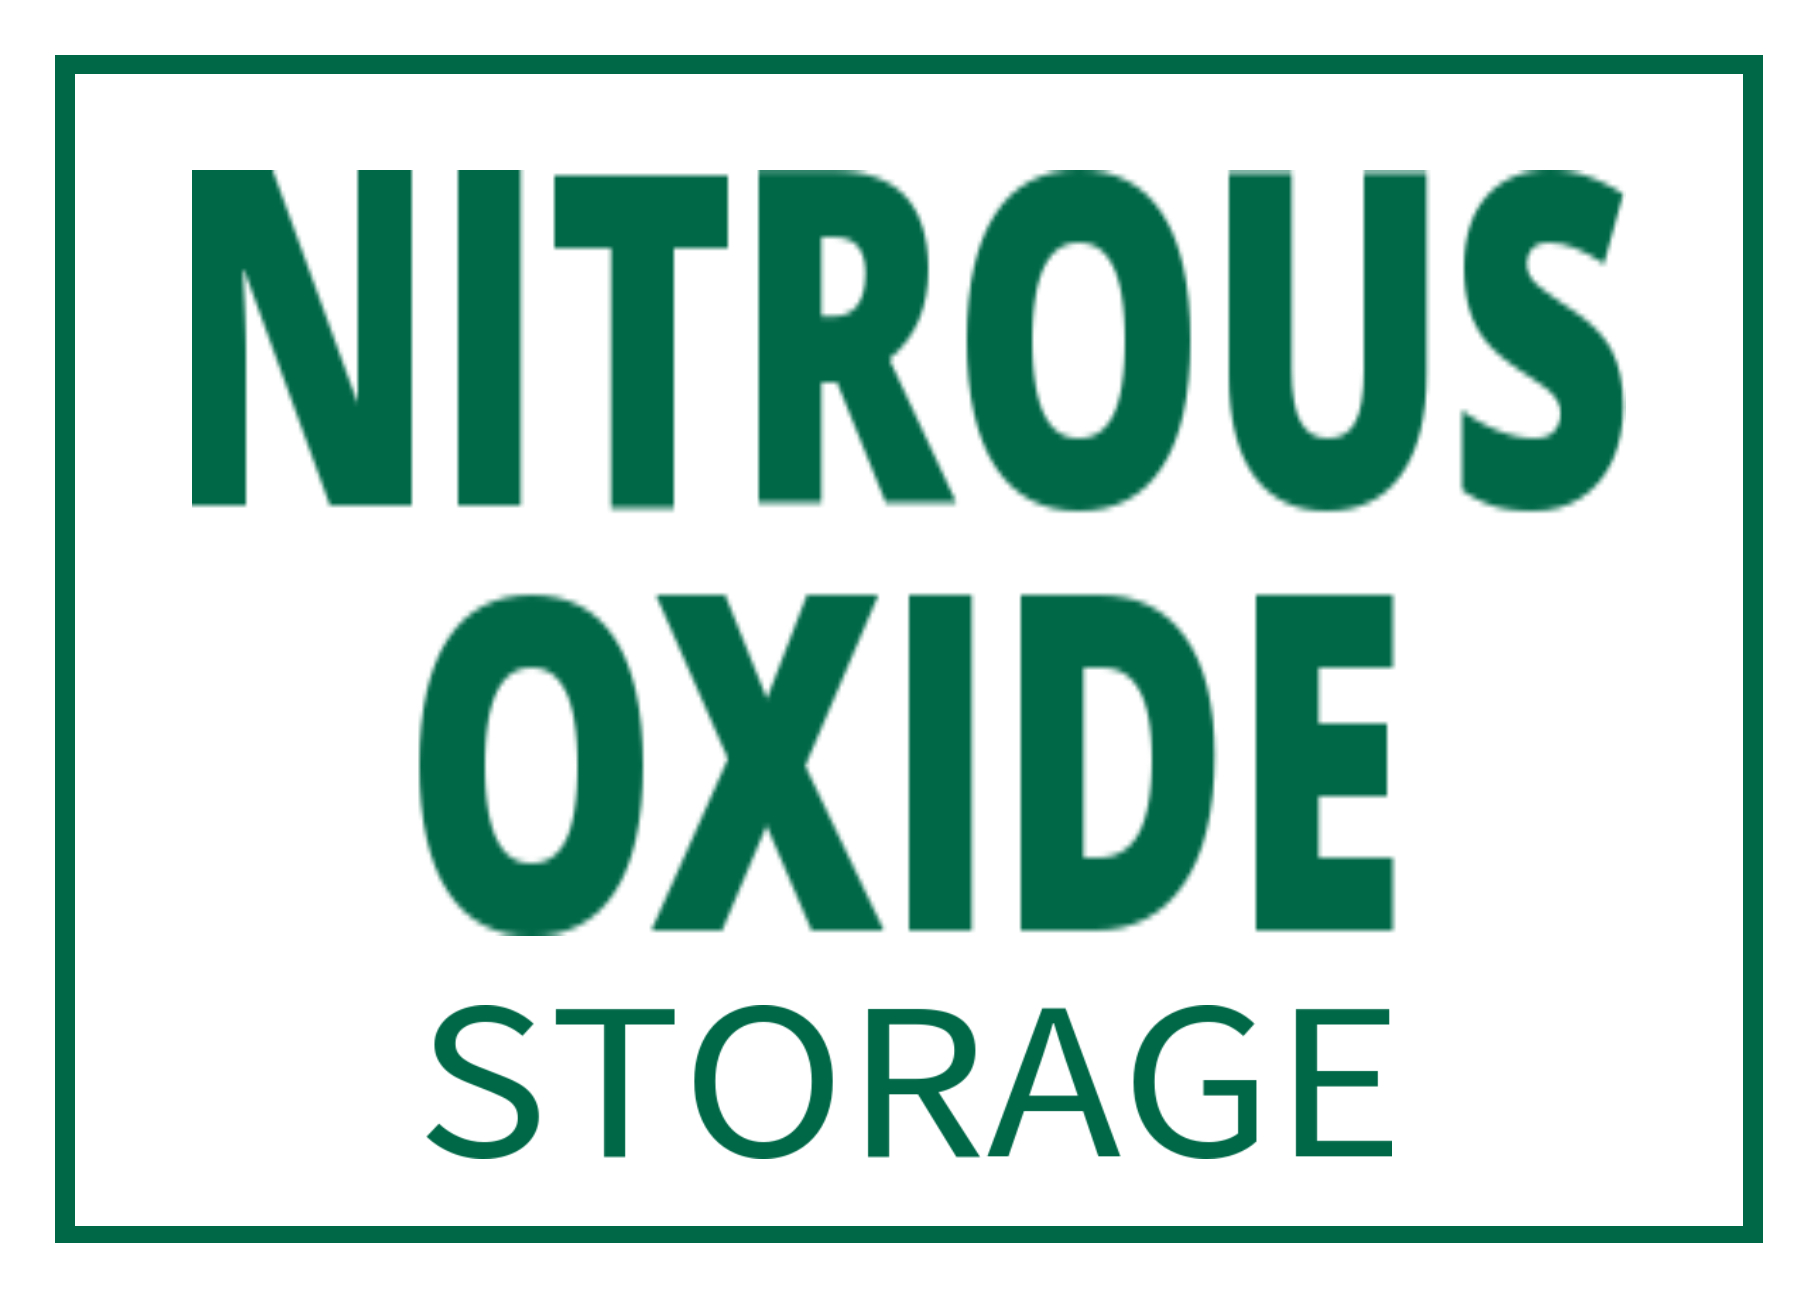 10x14 PVC Wall Sign, Safety - Tags: Nitrous, oxide, storage, gases, closet, health, canister